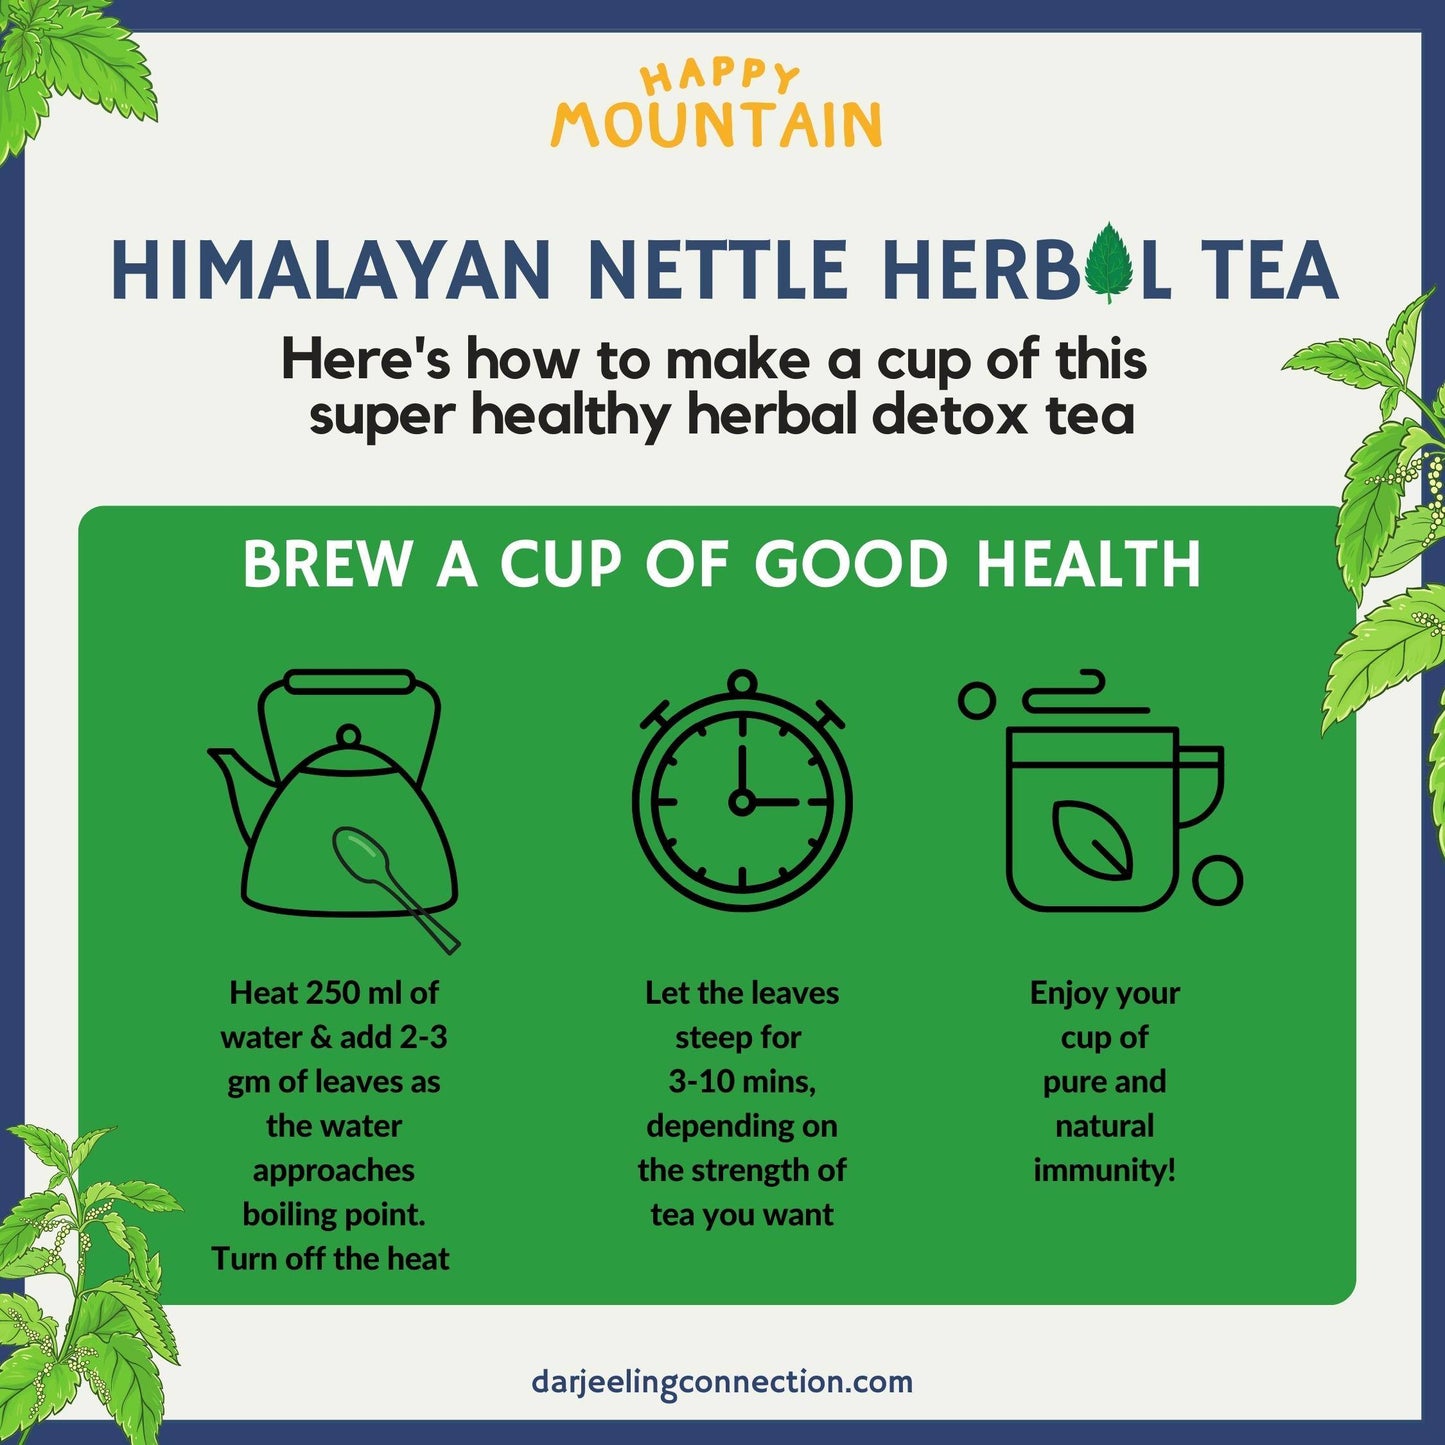 Guide to Brew Stinging Nettle Tea - Darjeeling Connection